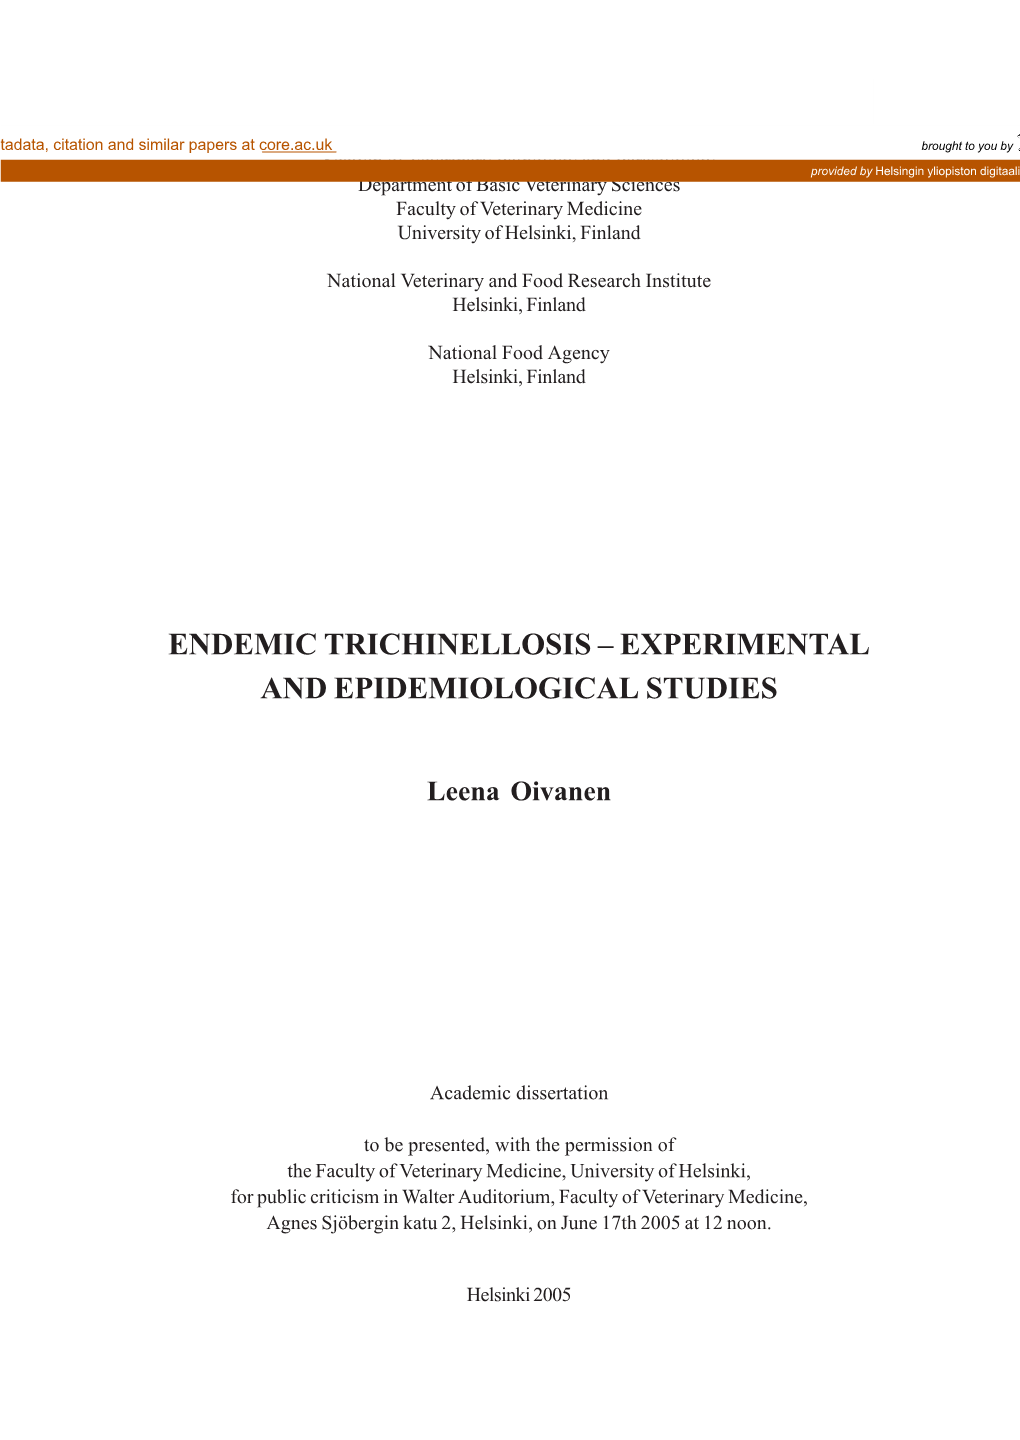 Endemic Trichinellosis – Experimental and Epidemiological Studies